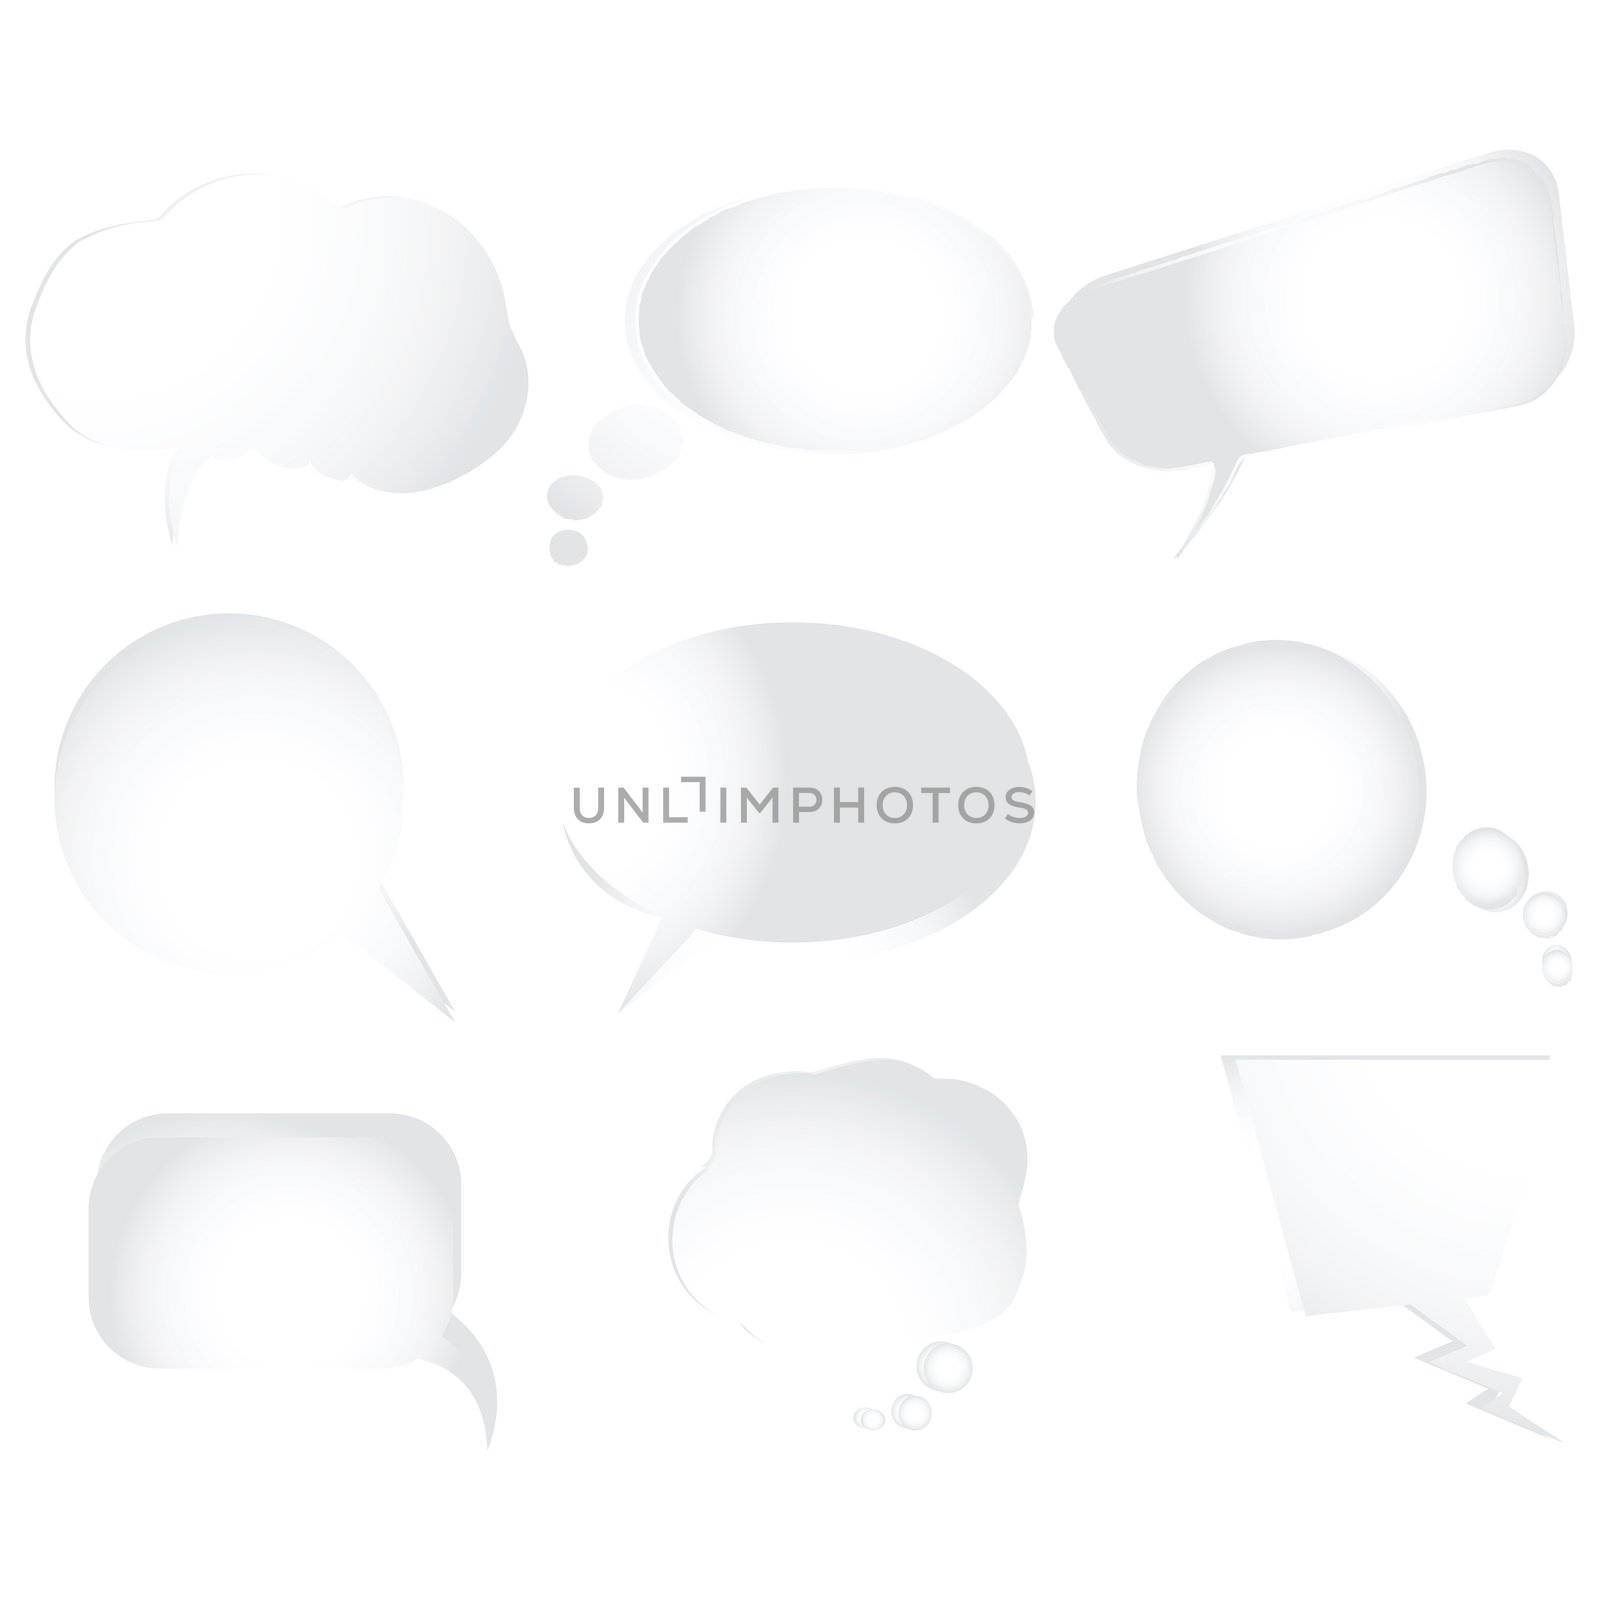 Collection of stylized text bubbles, vector isolated objects on white, abstract art illustration